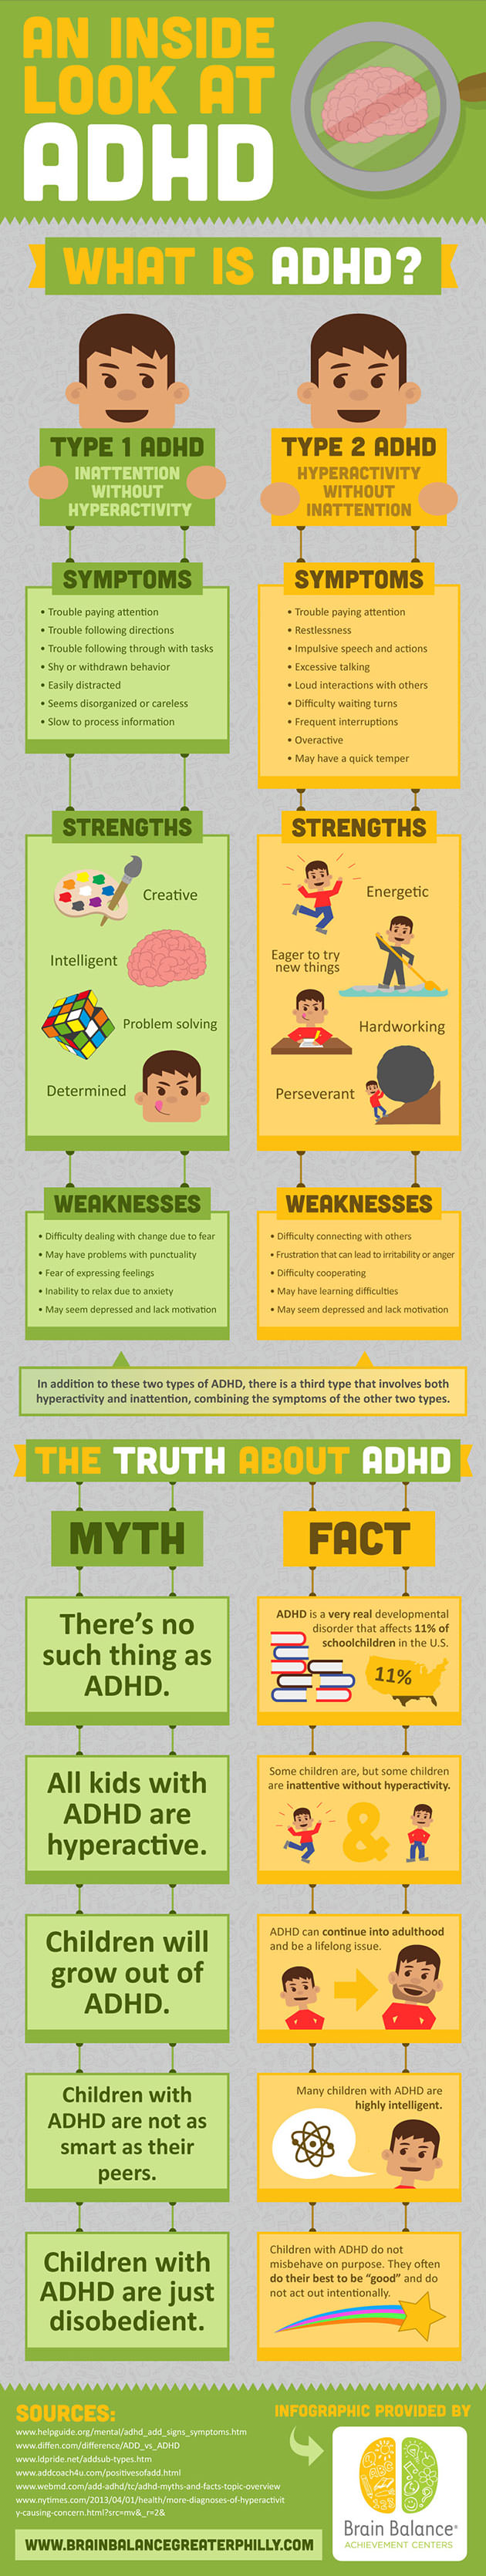 An Inside Look At ADHD Infographic